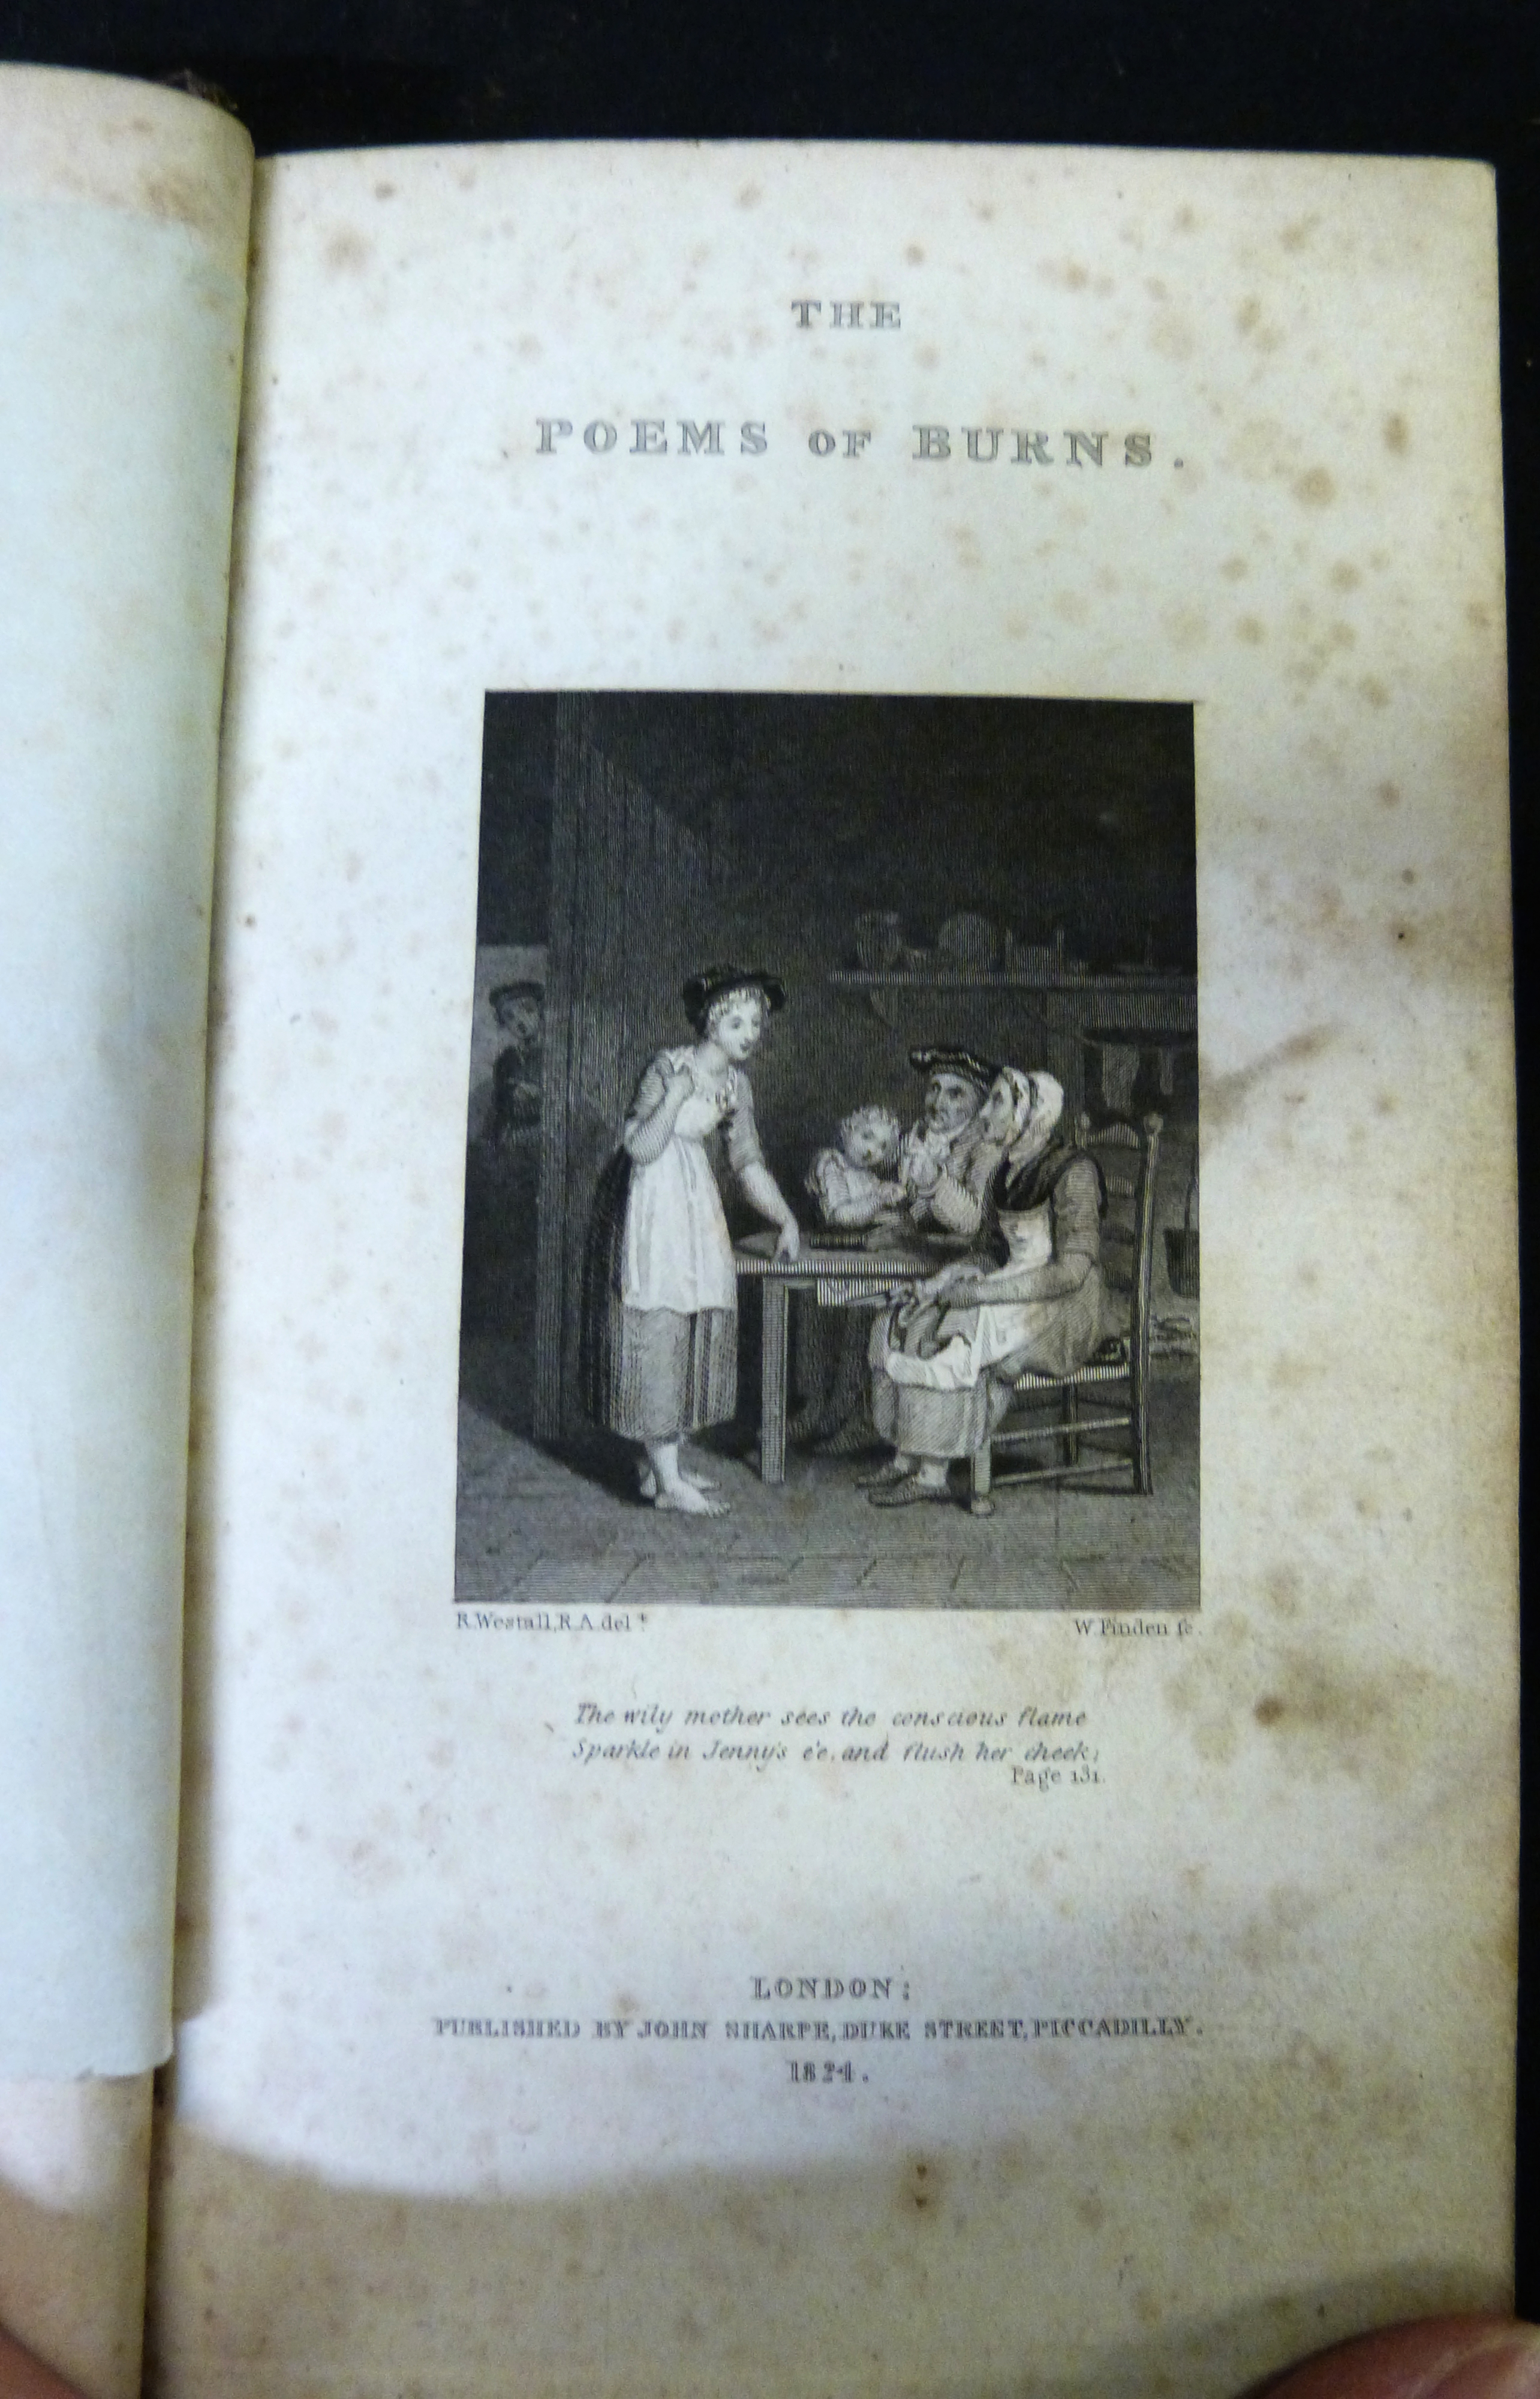 ROBERT BURNS: POEMS CHIEFLY IN THE SCOTTISH DIALECT, London, John Sharpe, 1824, printed by C - Image 3 of 3